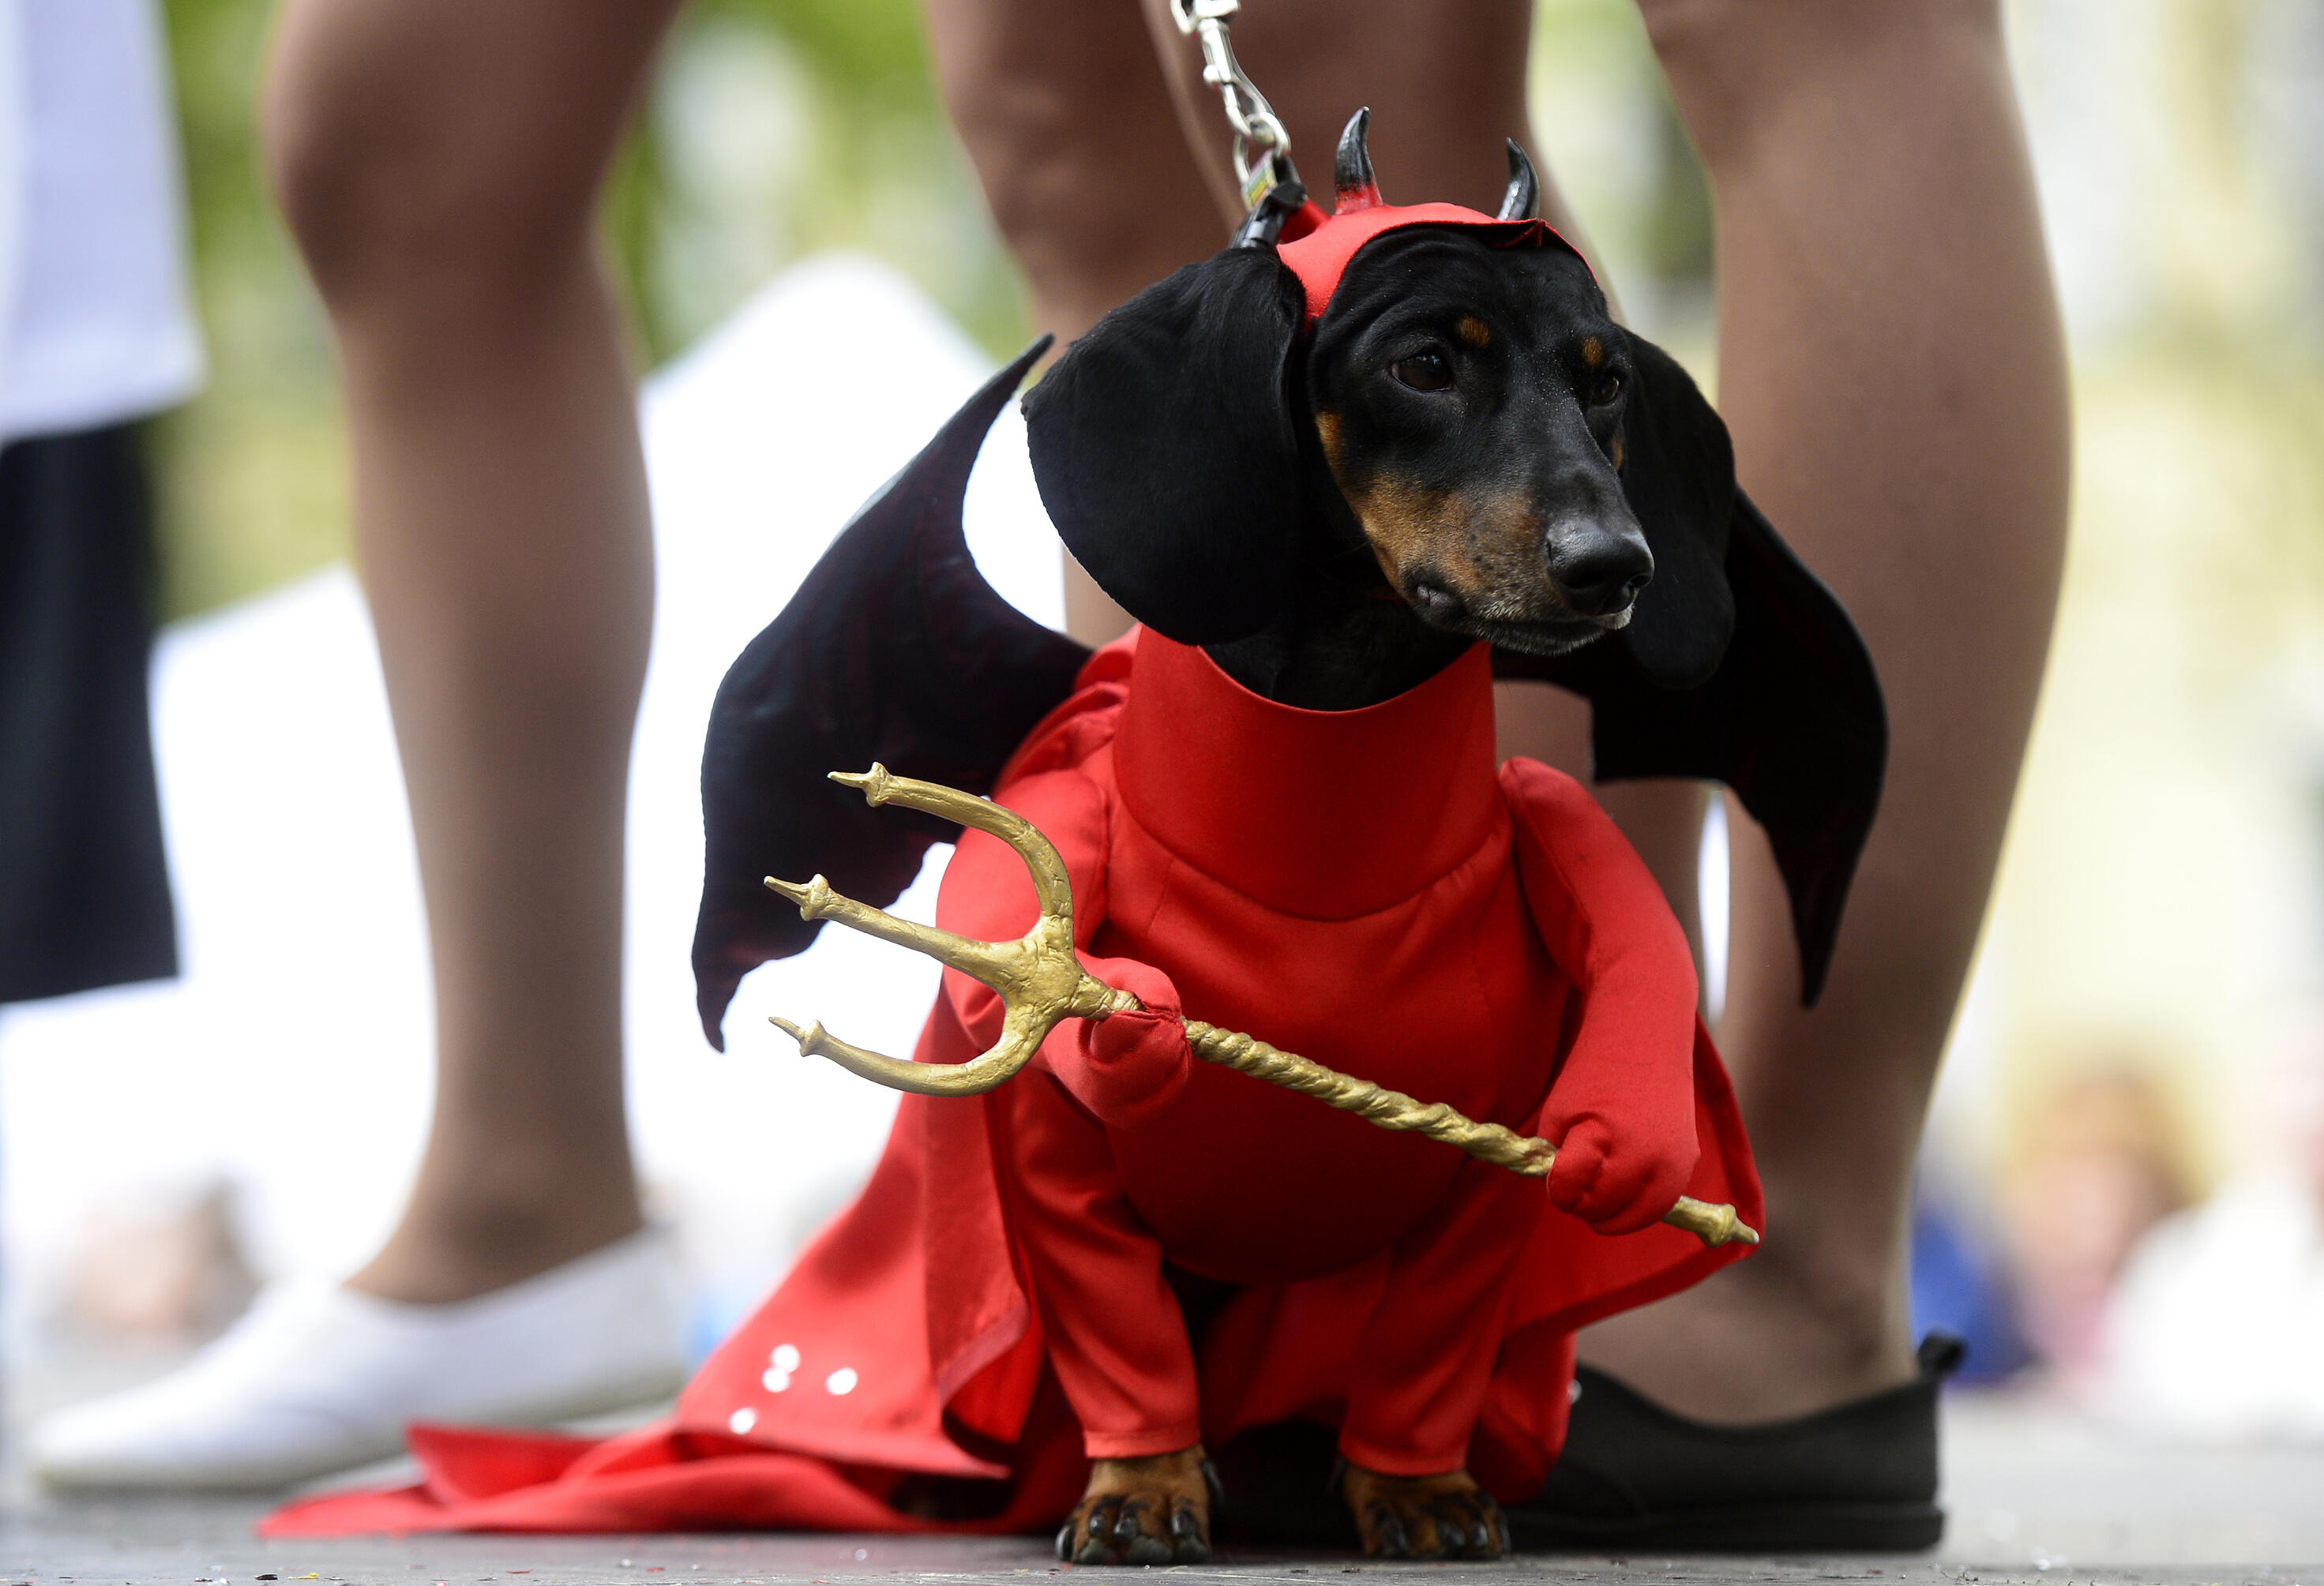 A dachshund dog wears a Prince of this World or devil costume during an annual dachshund parade in Saint Petersburg, on May 27, 2017. / AFP PHOTO / OLGA MALTSEVA        (Photo credit should read OLGA MALTSEVA/AFP/Getty Images)